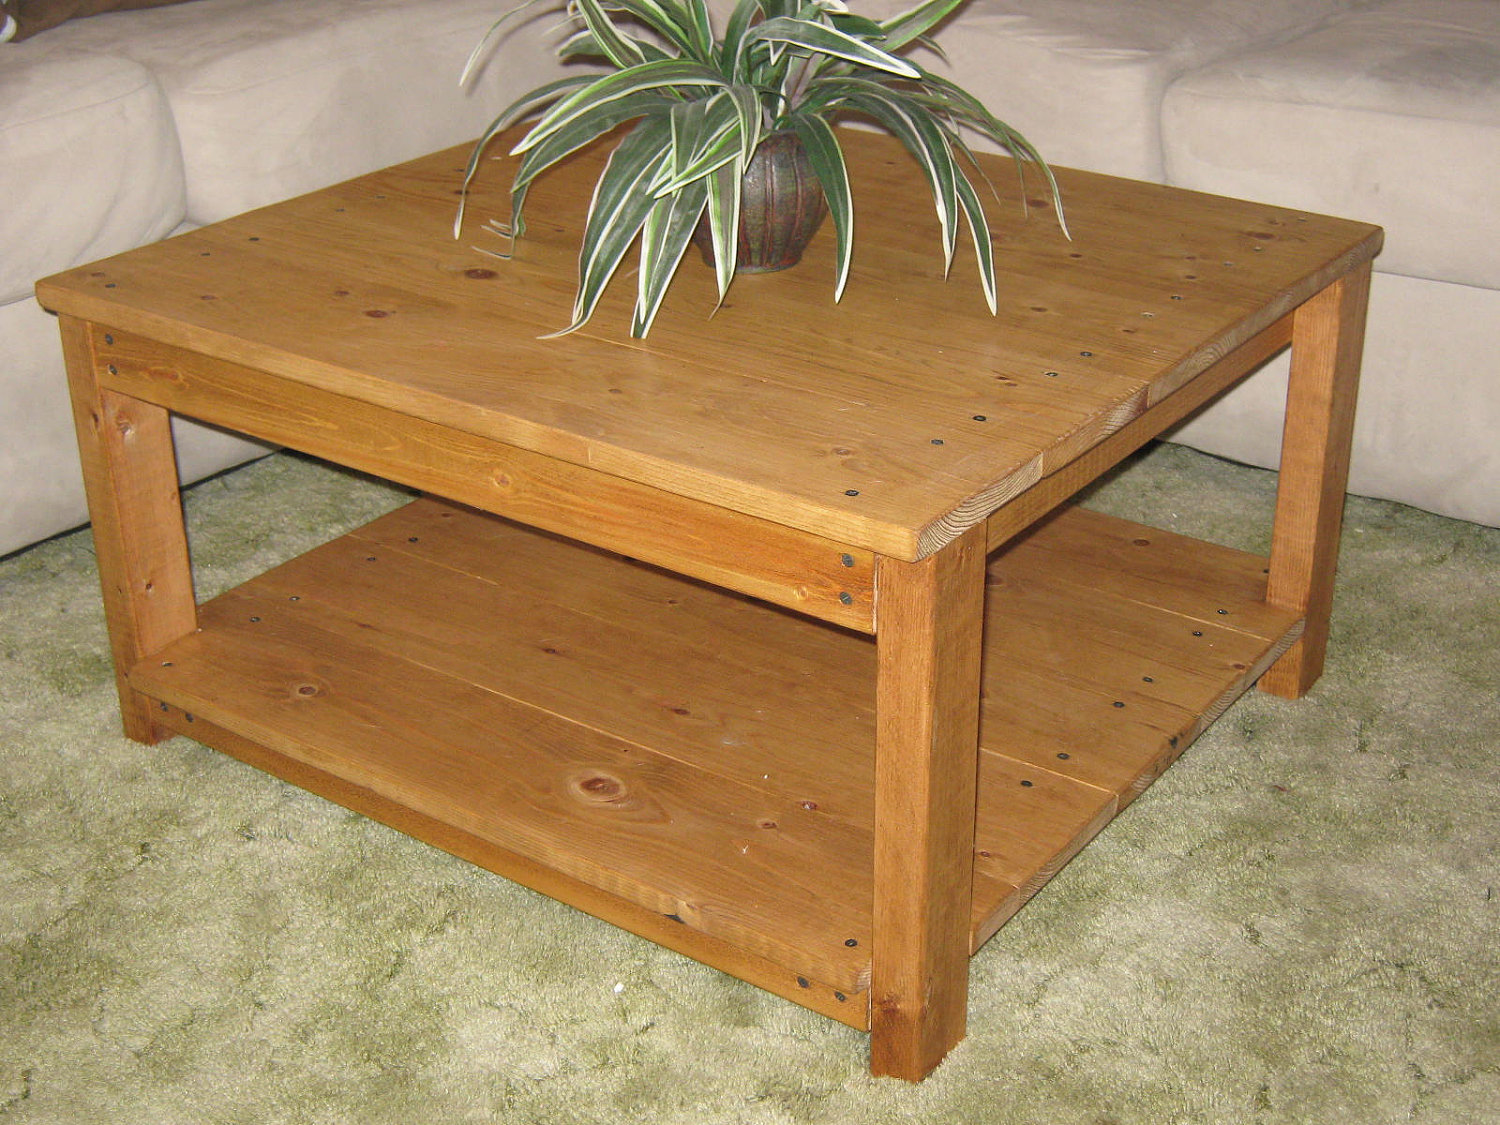 wood coffee table plans photo - 5